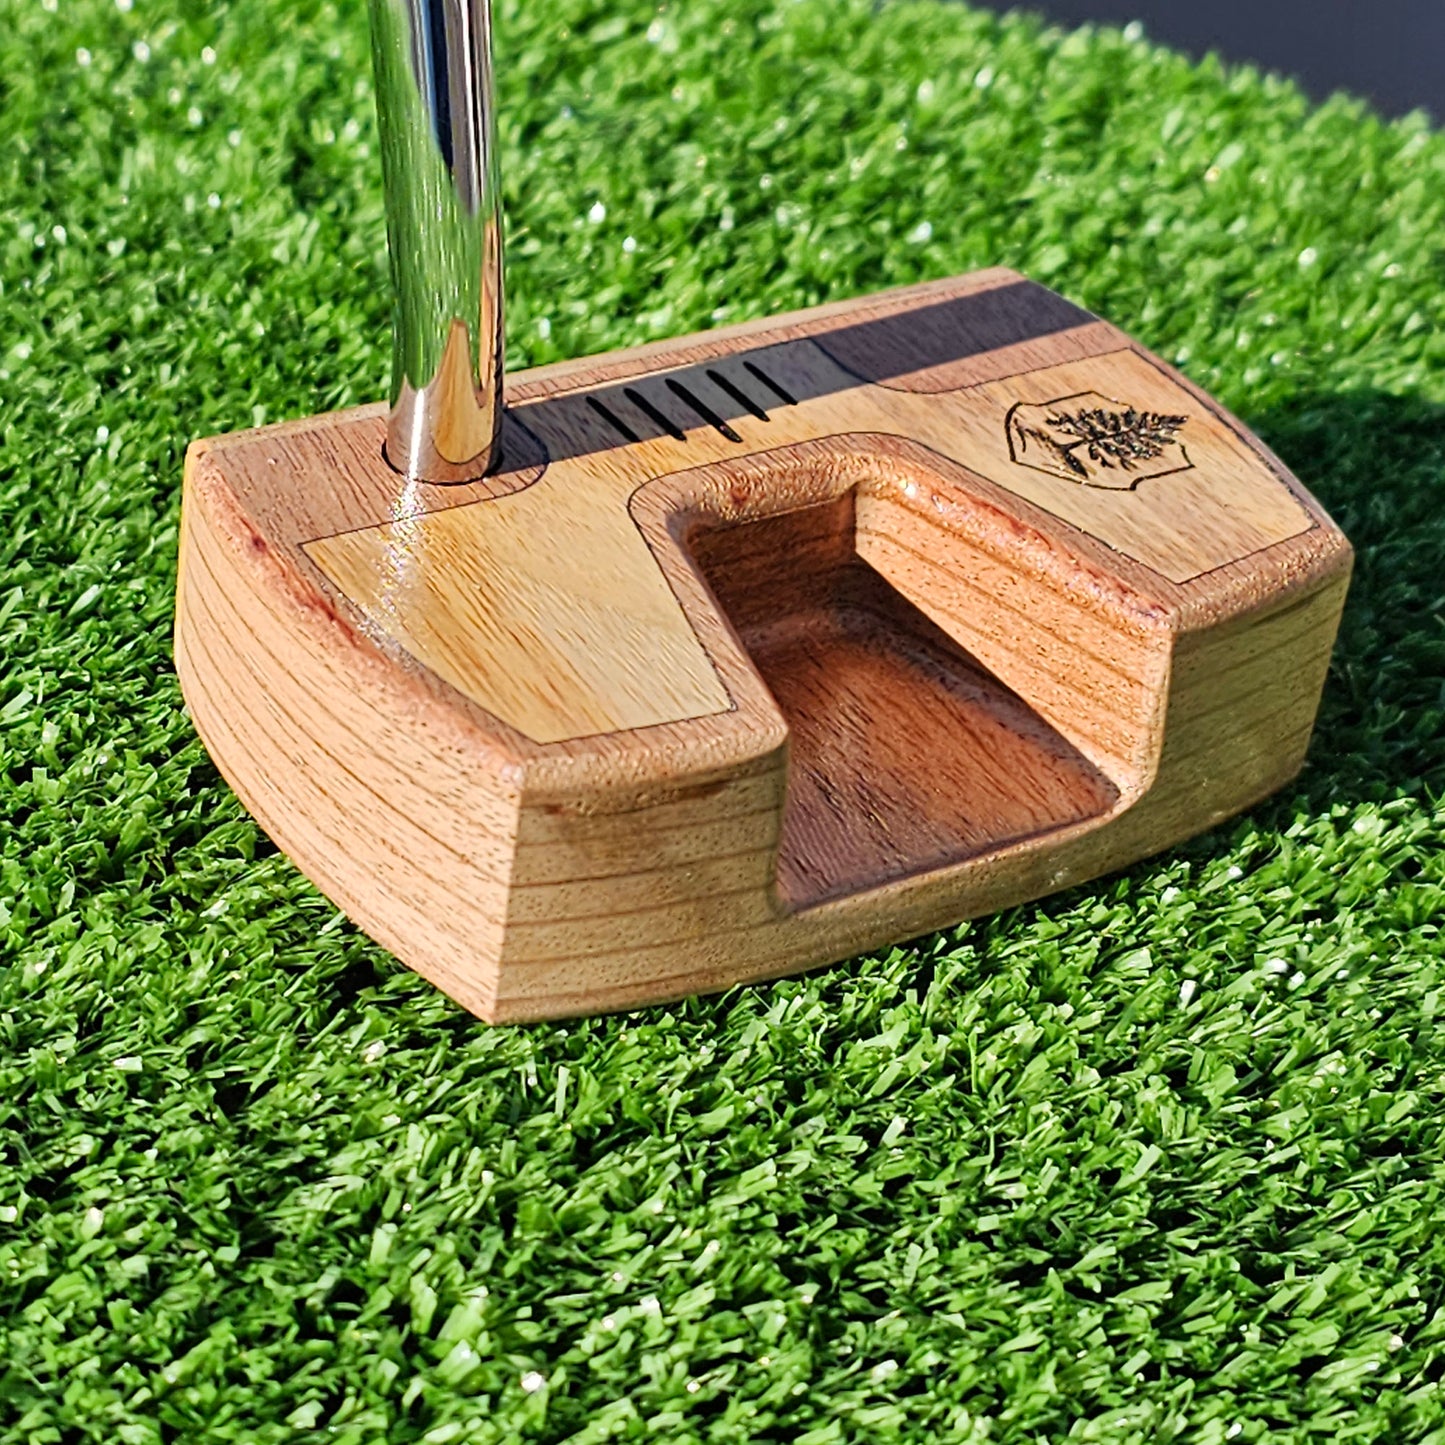 Canarywood and Mahogany Woodrich Regal wood putter